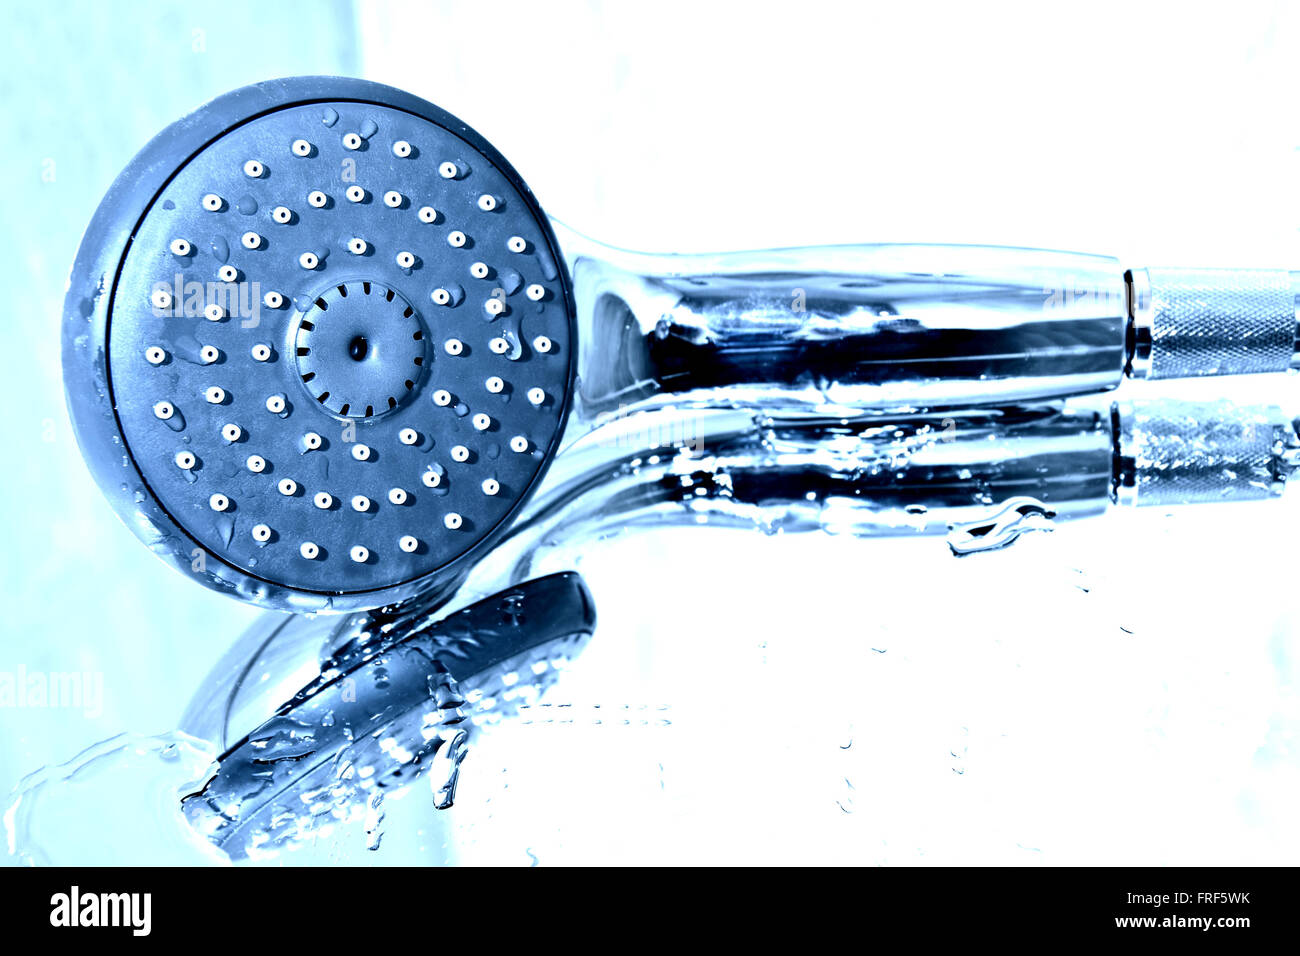 Handshower and water in the bath. Stock Photo